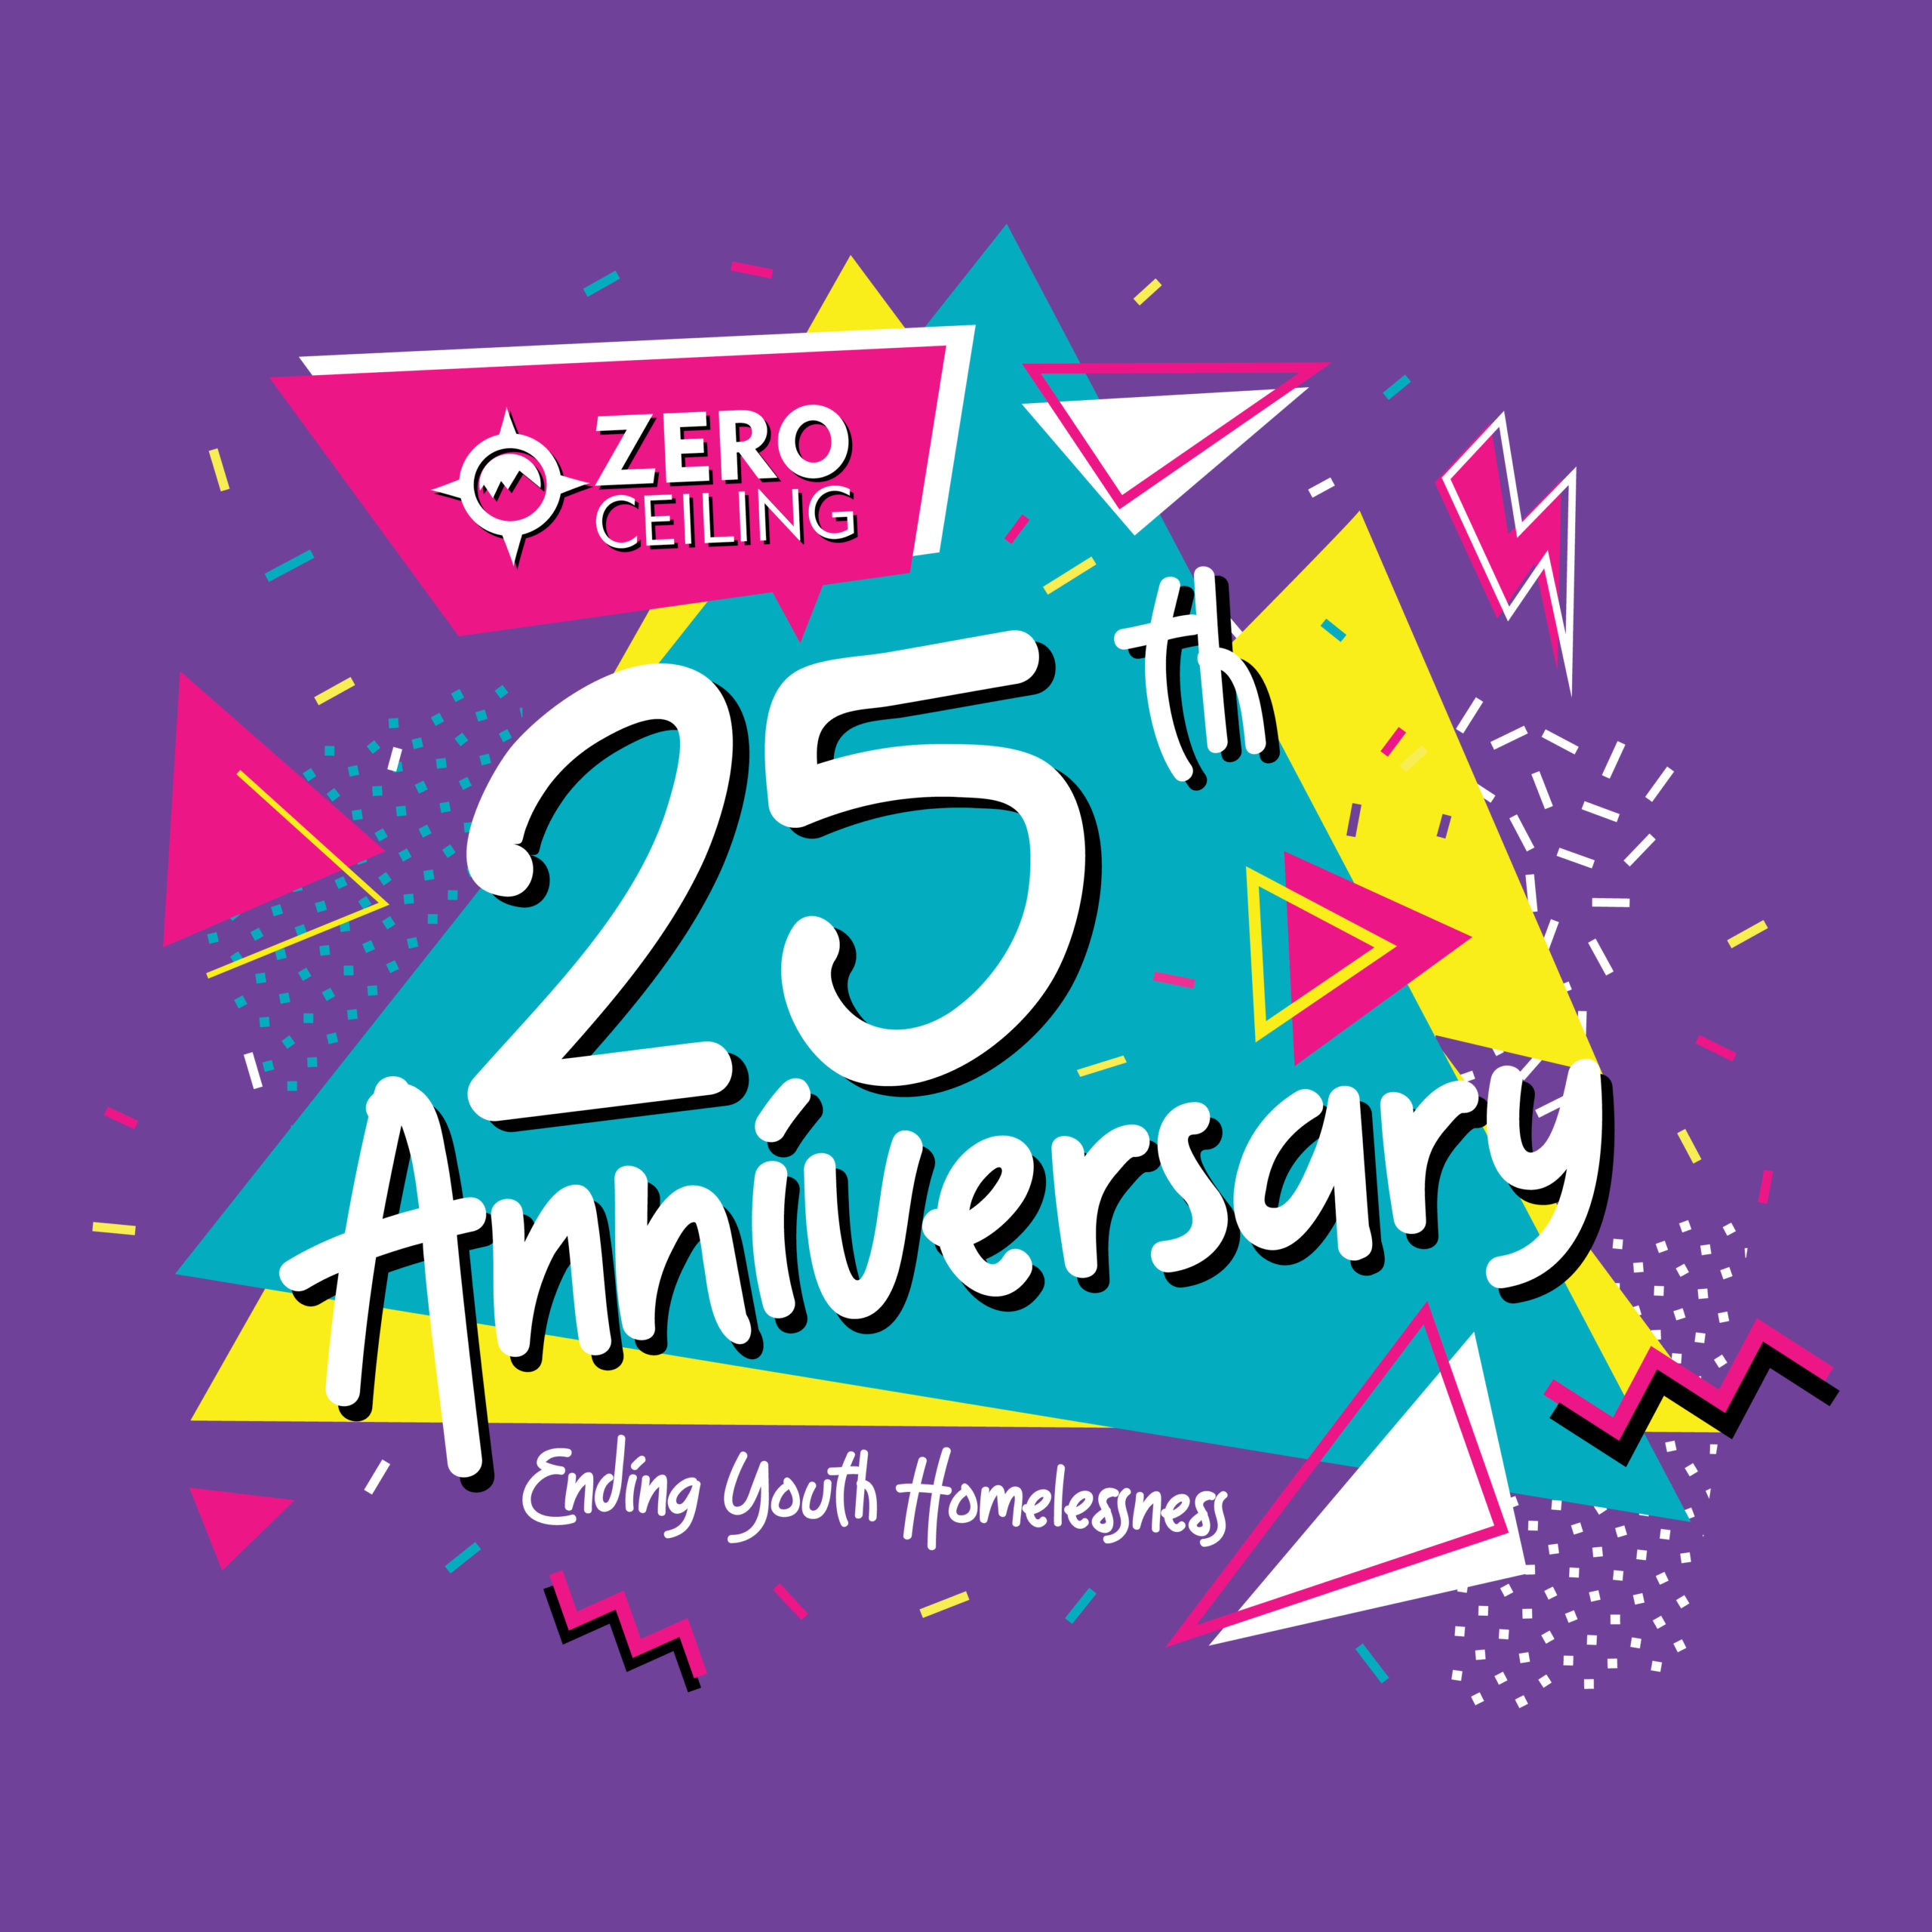 A graphic which says "Zero Ceiling 25th Anniversary: Ending Youth Homelessness". The text is overlaid on a brightly coloured, 90s-inspired abstract background